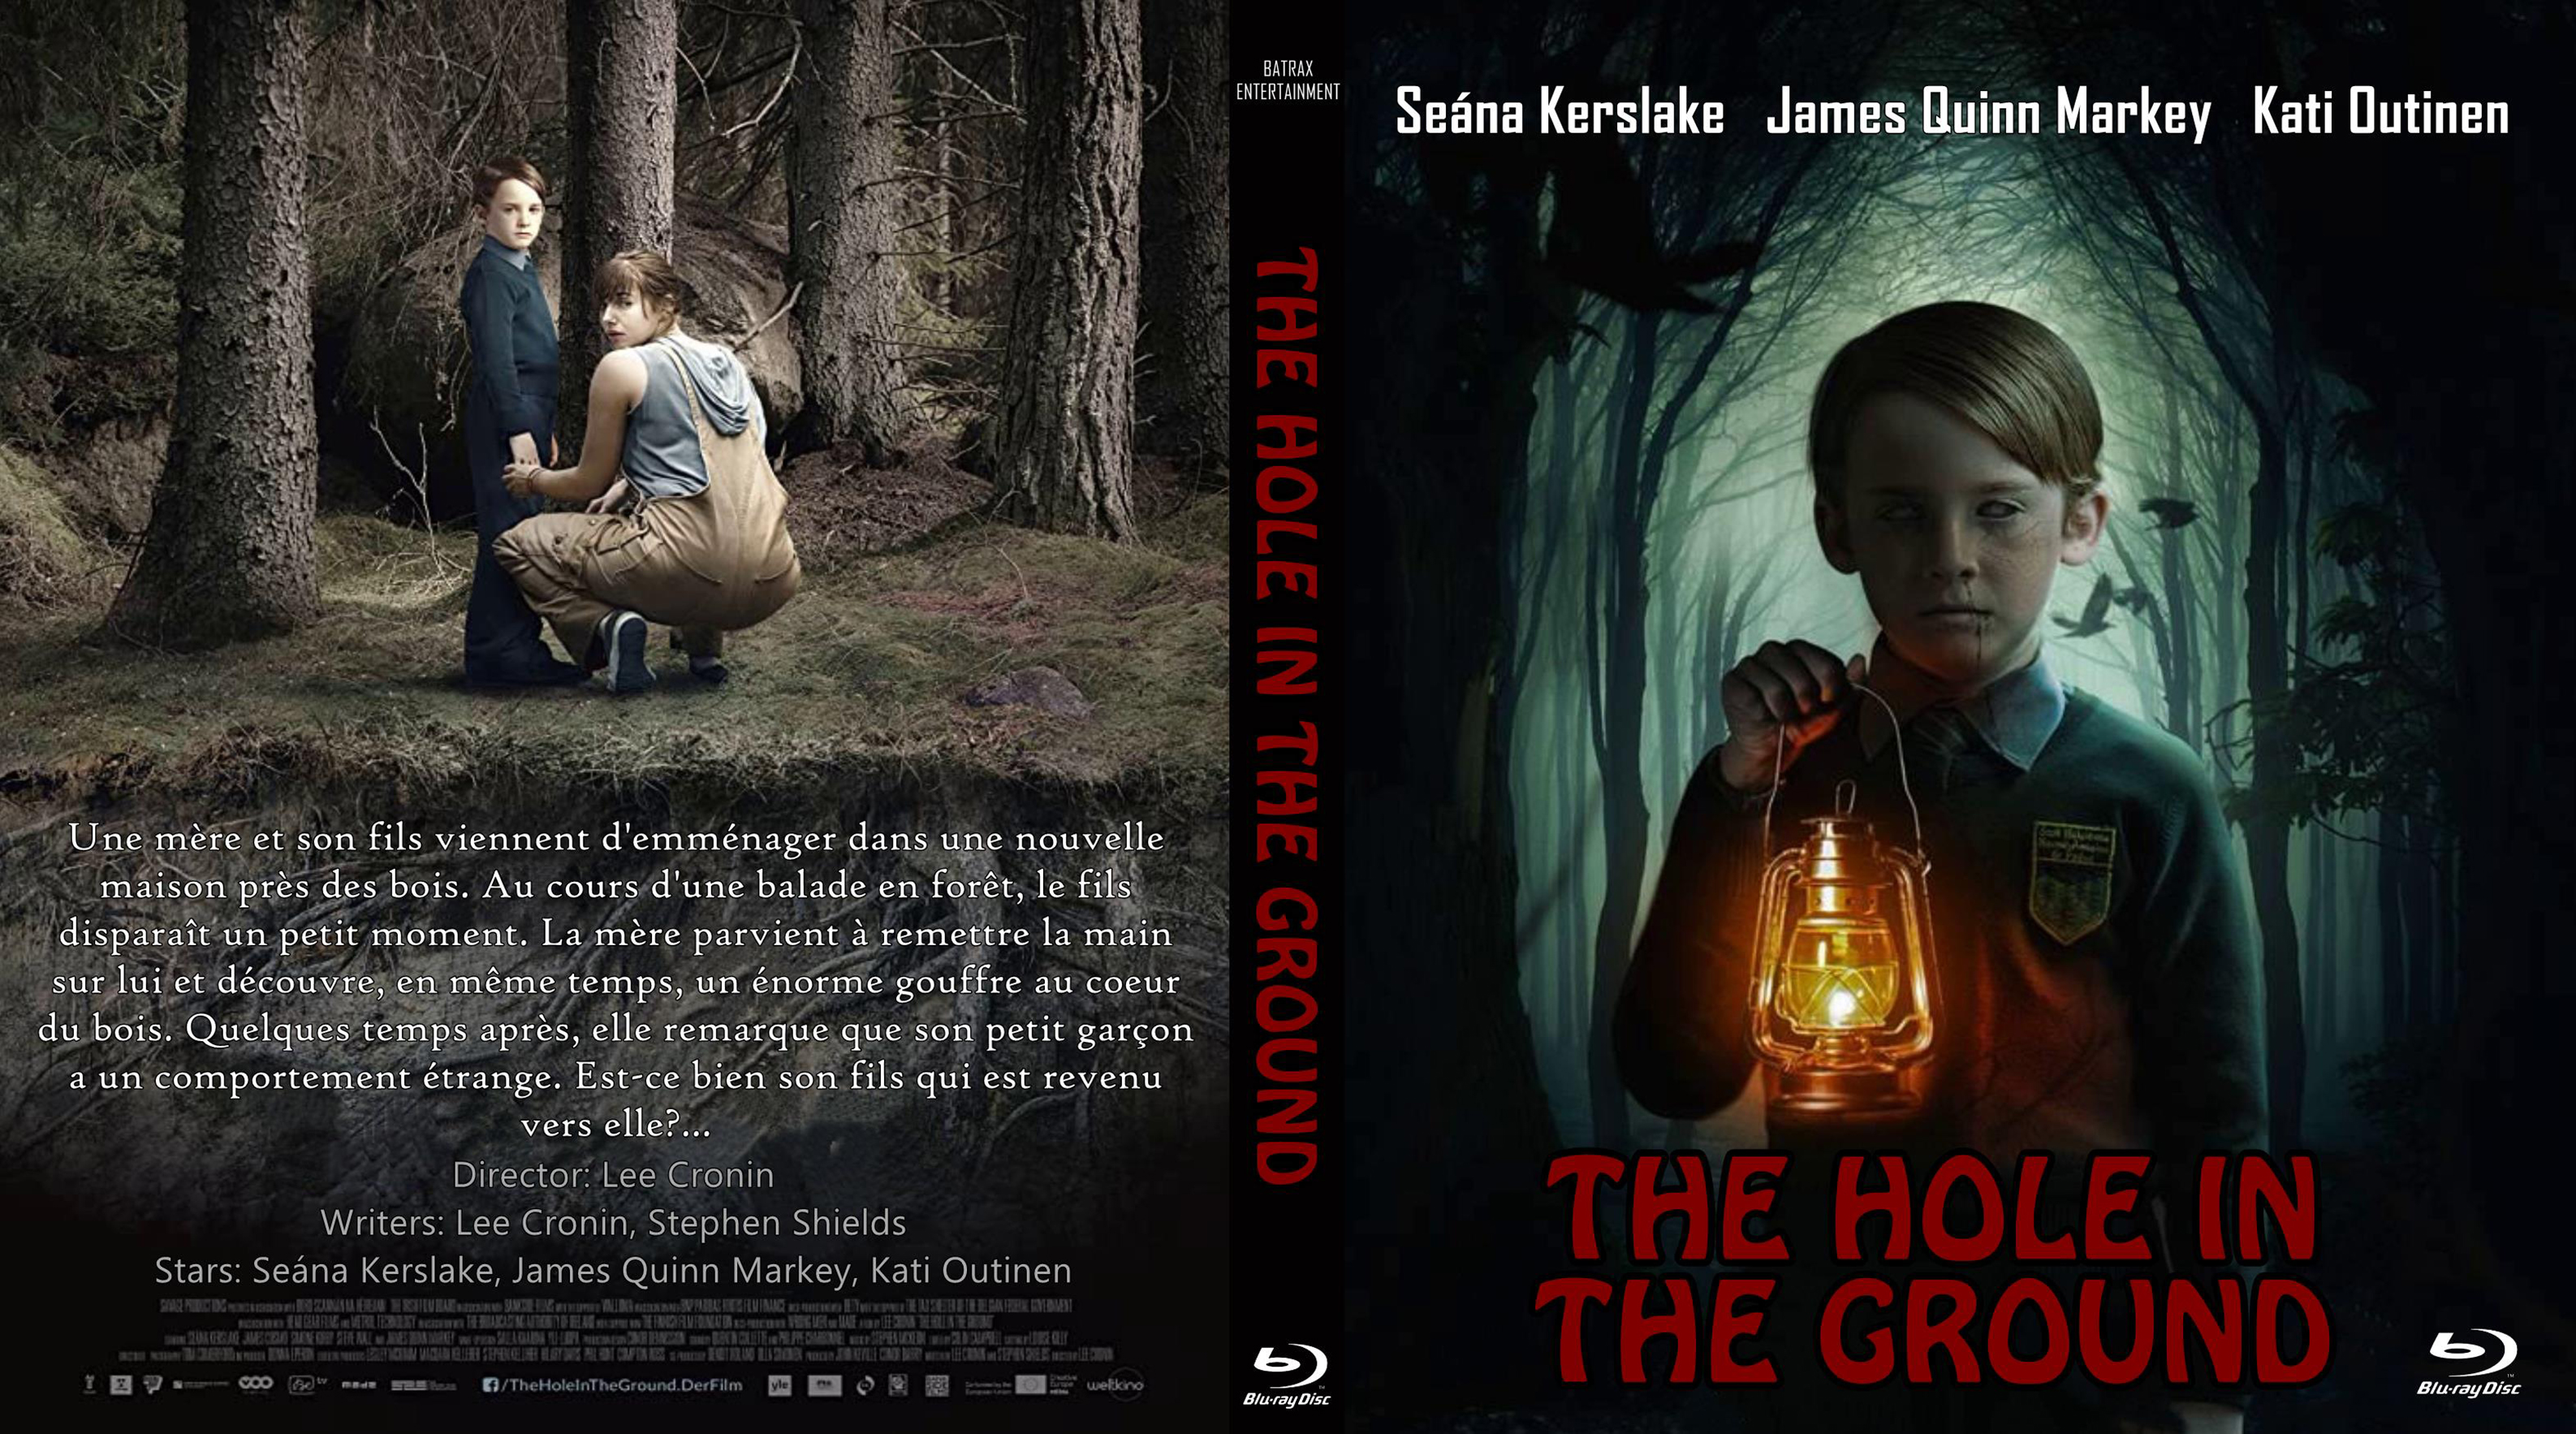 Jaquette DVD The hole in the ground custom